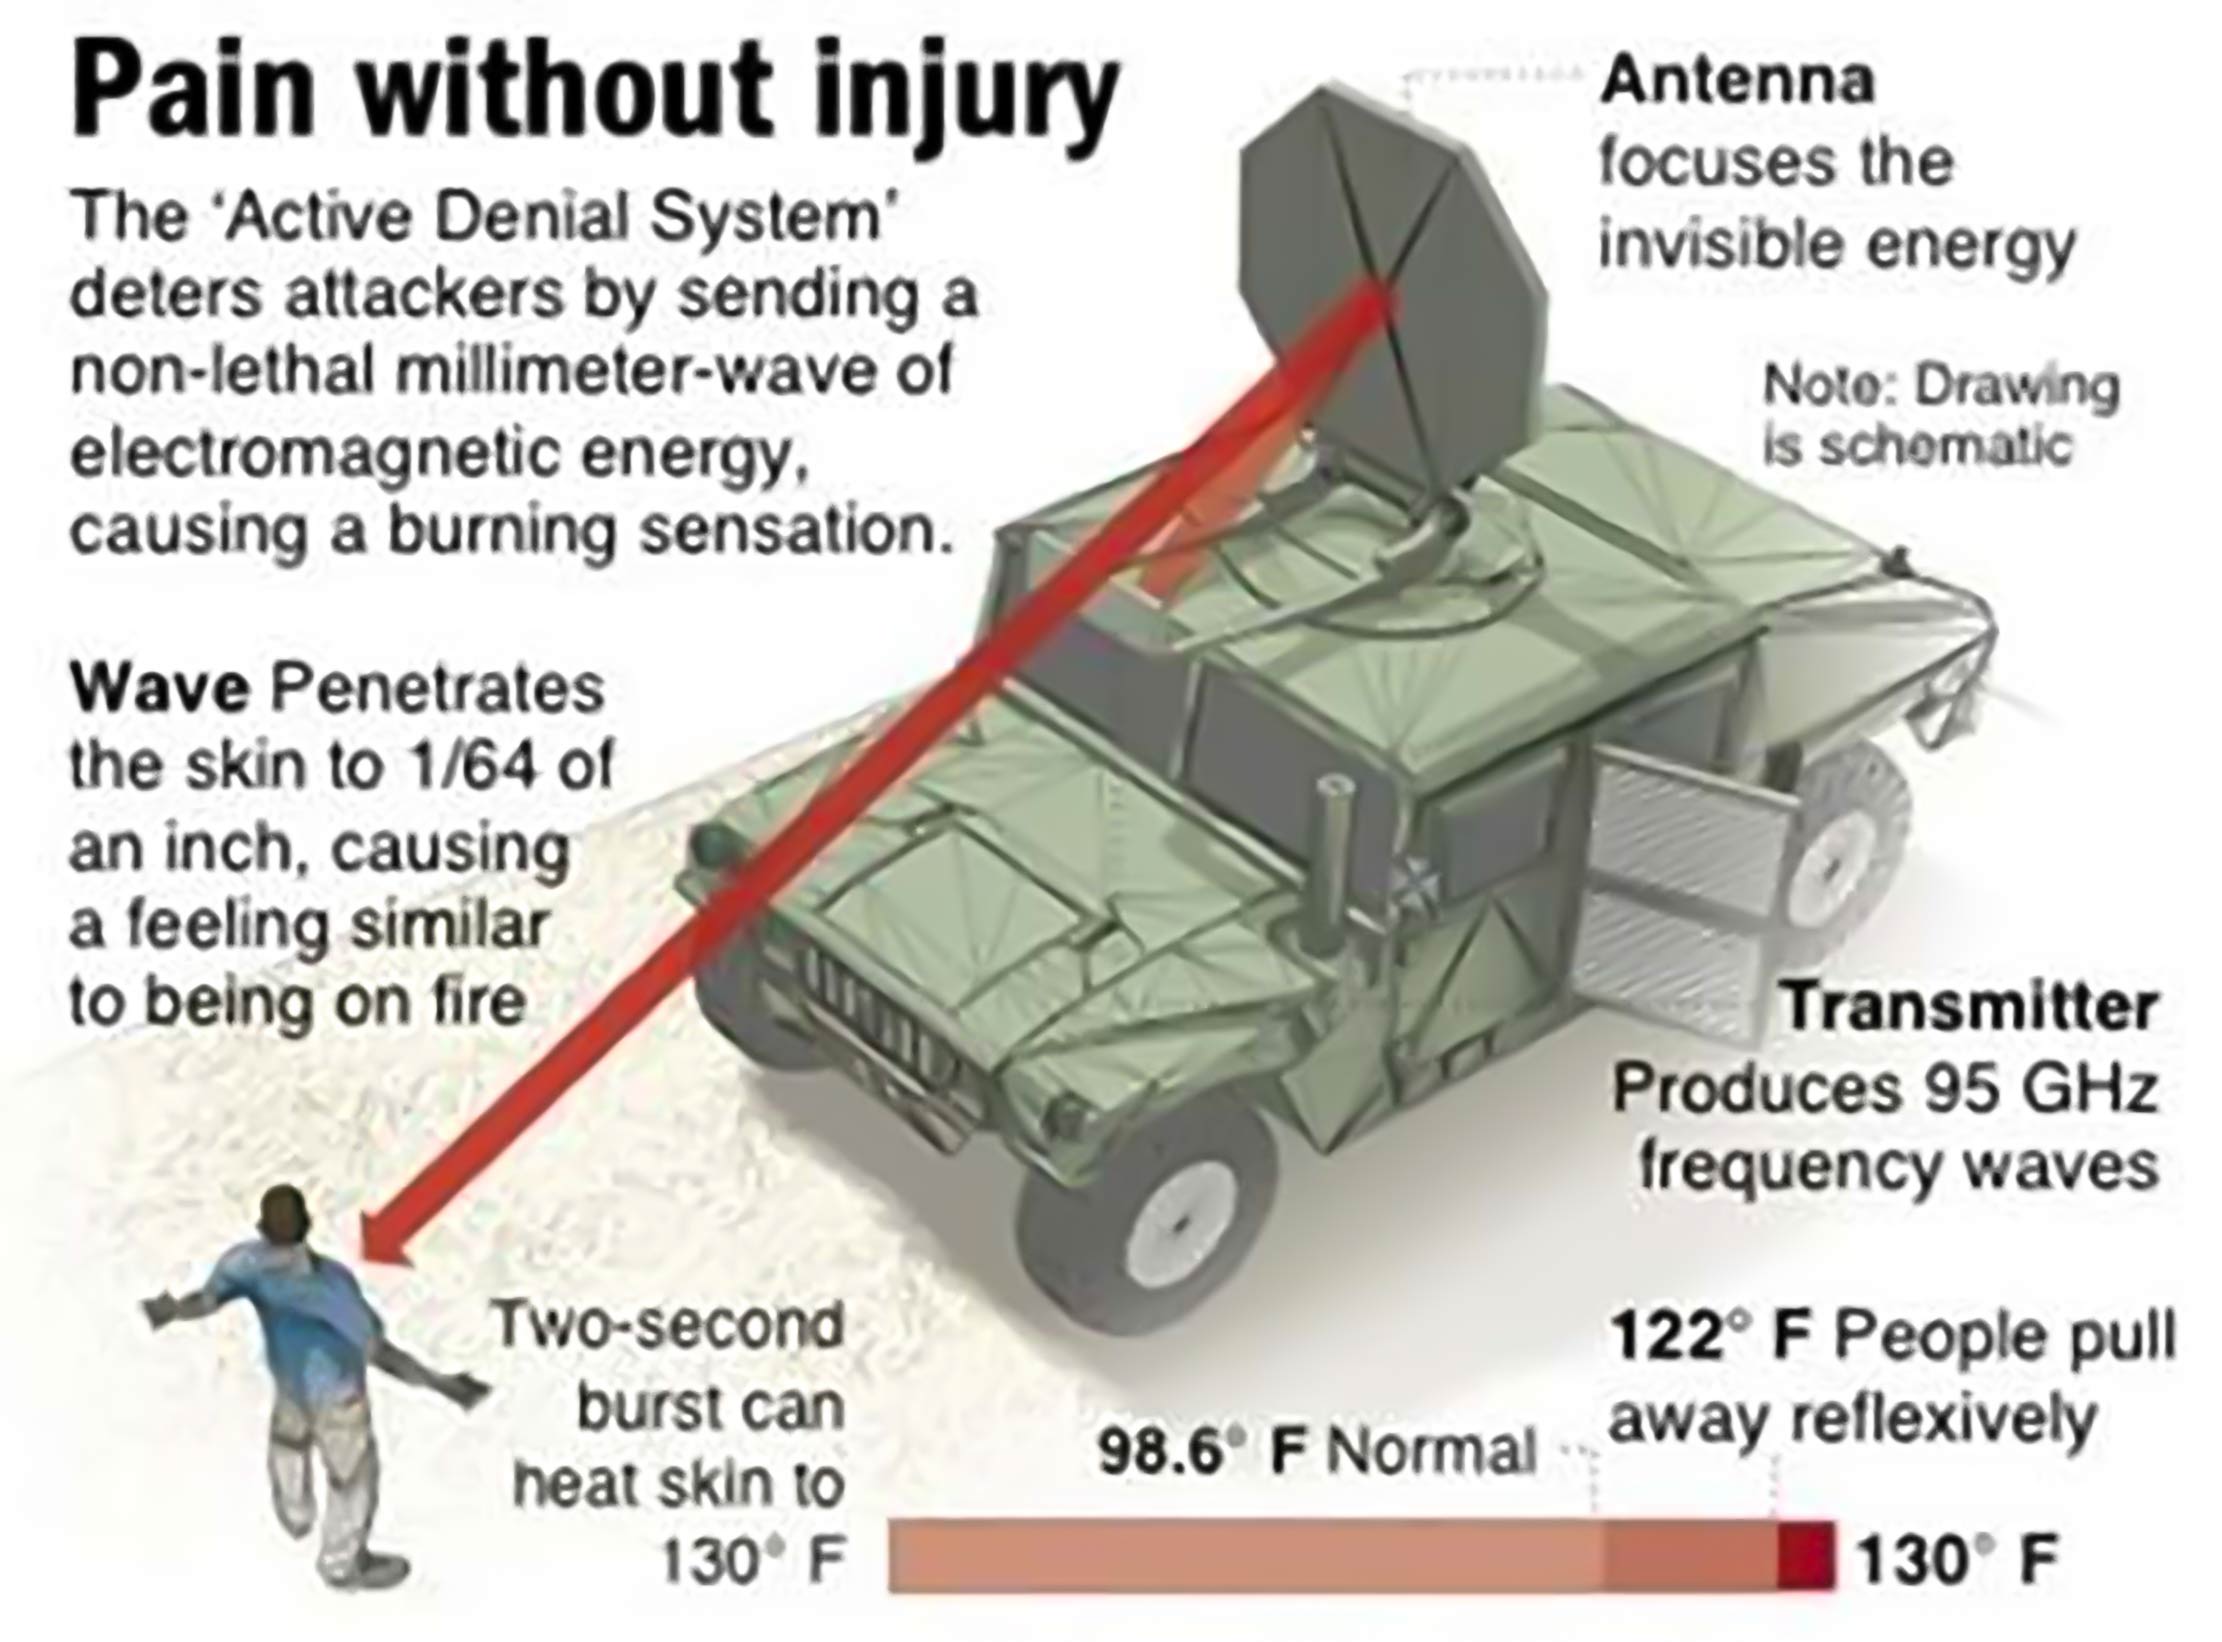 Active Denial System (ADS)